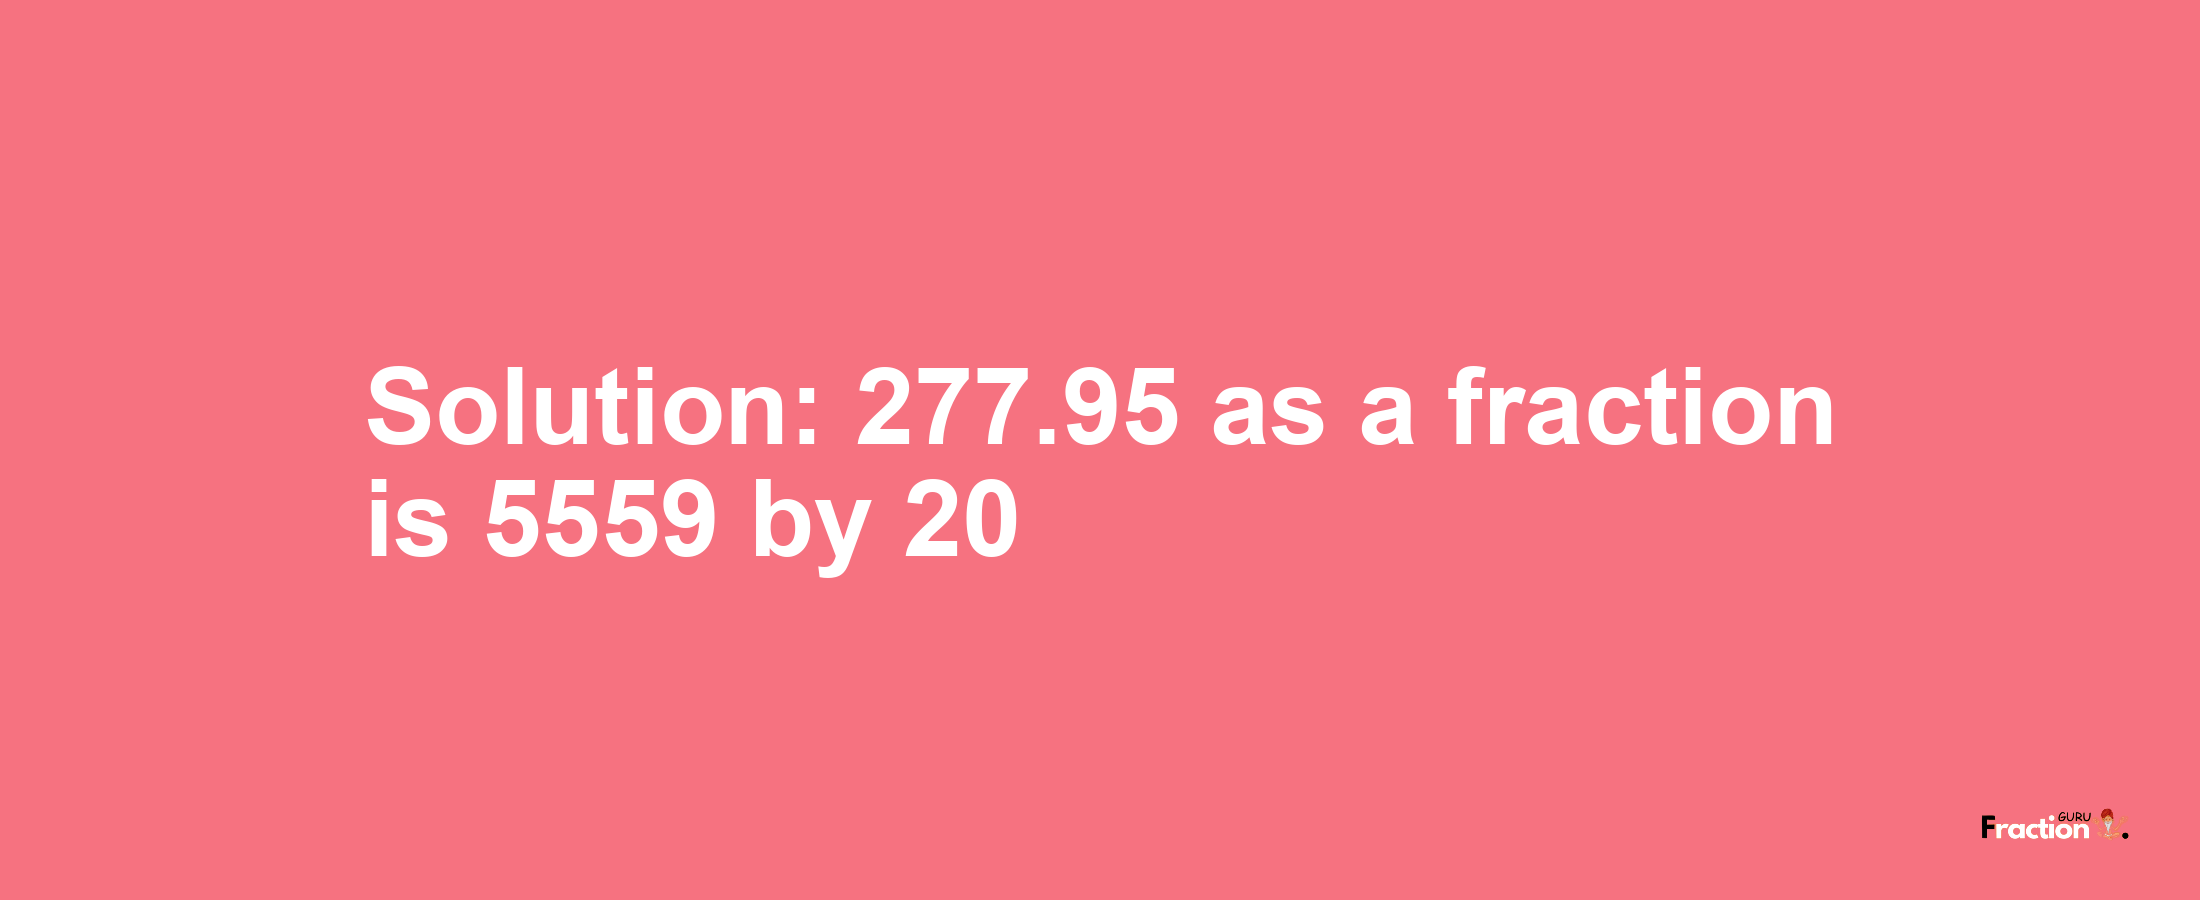 Solution:277.95 as a fraction is 5559/20